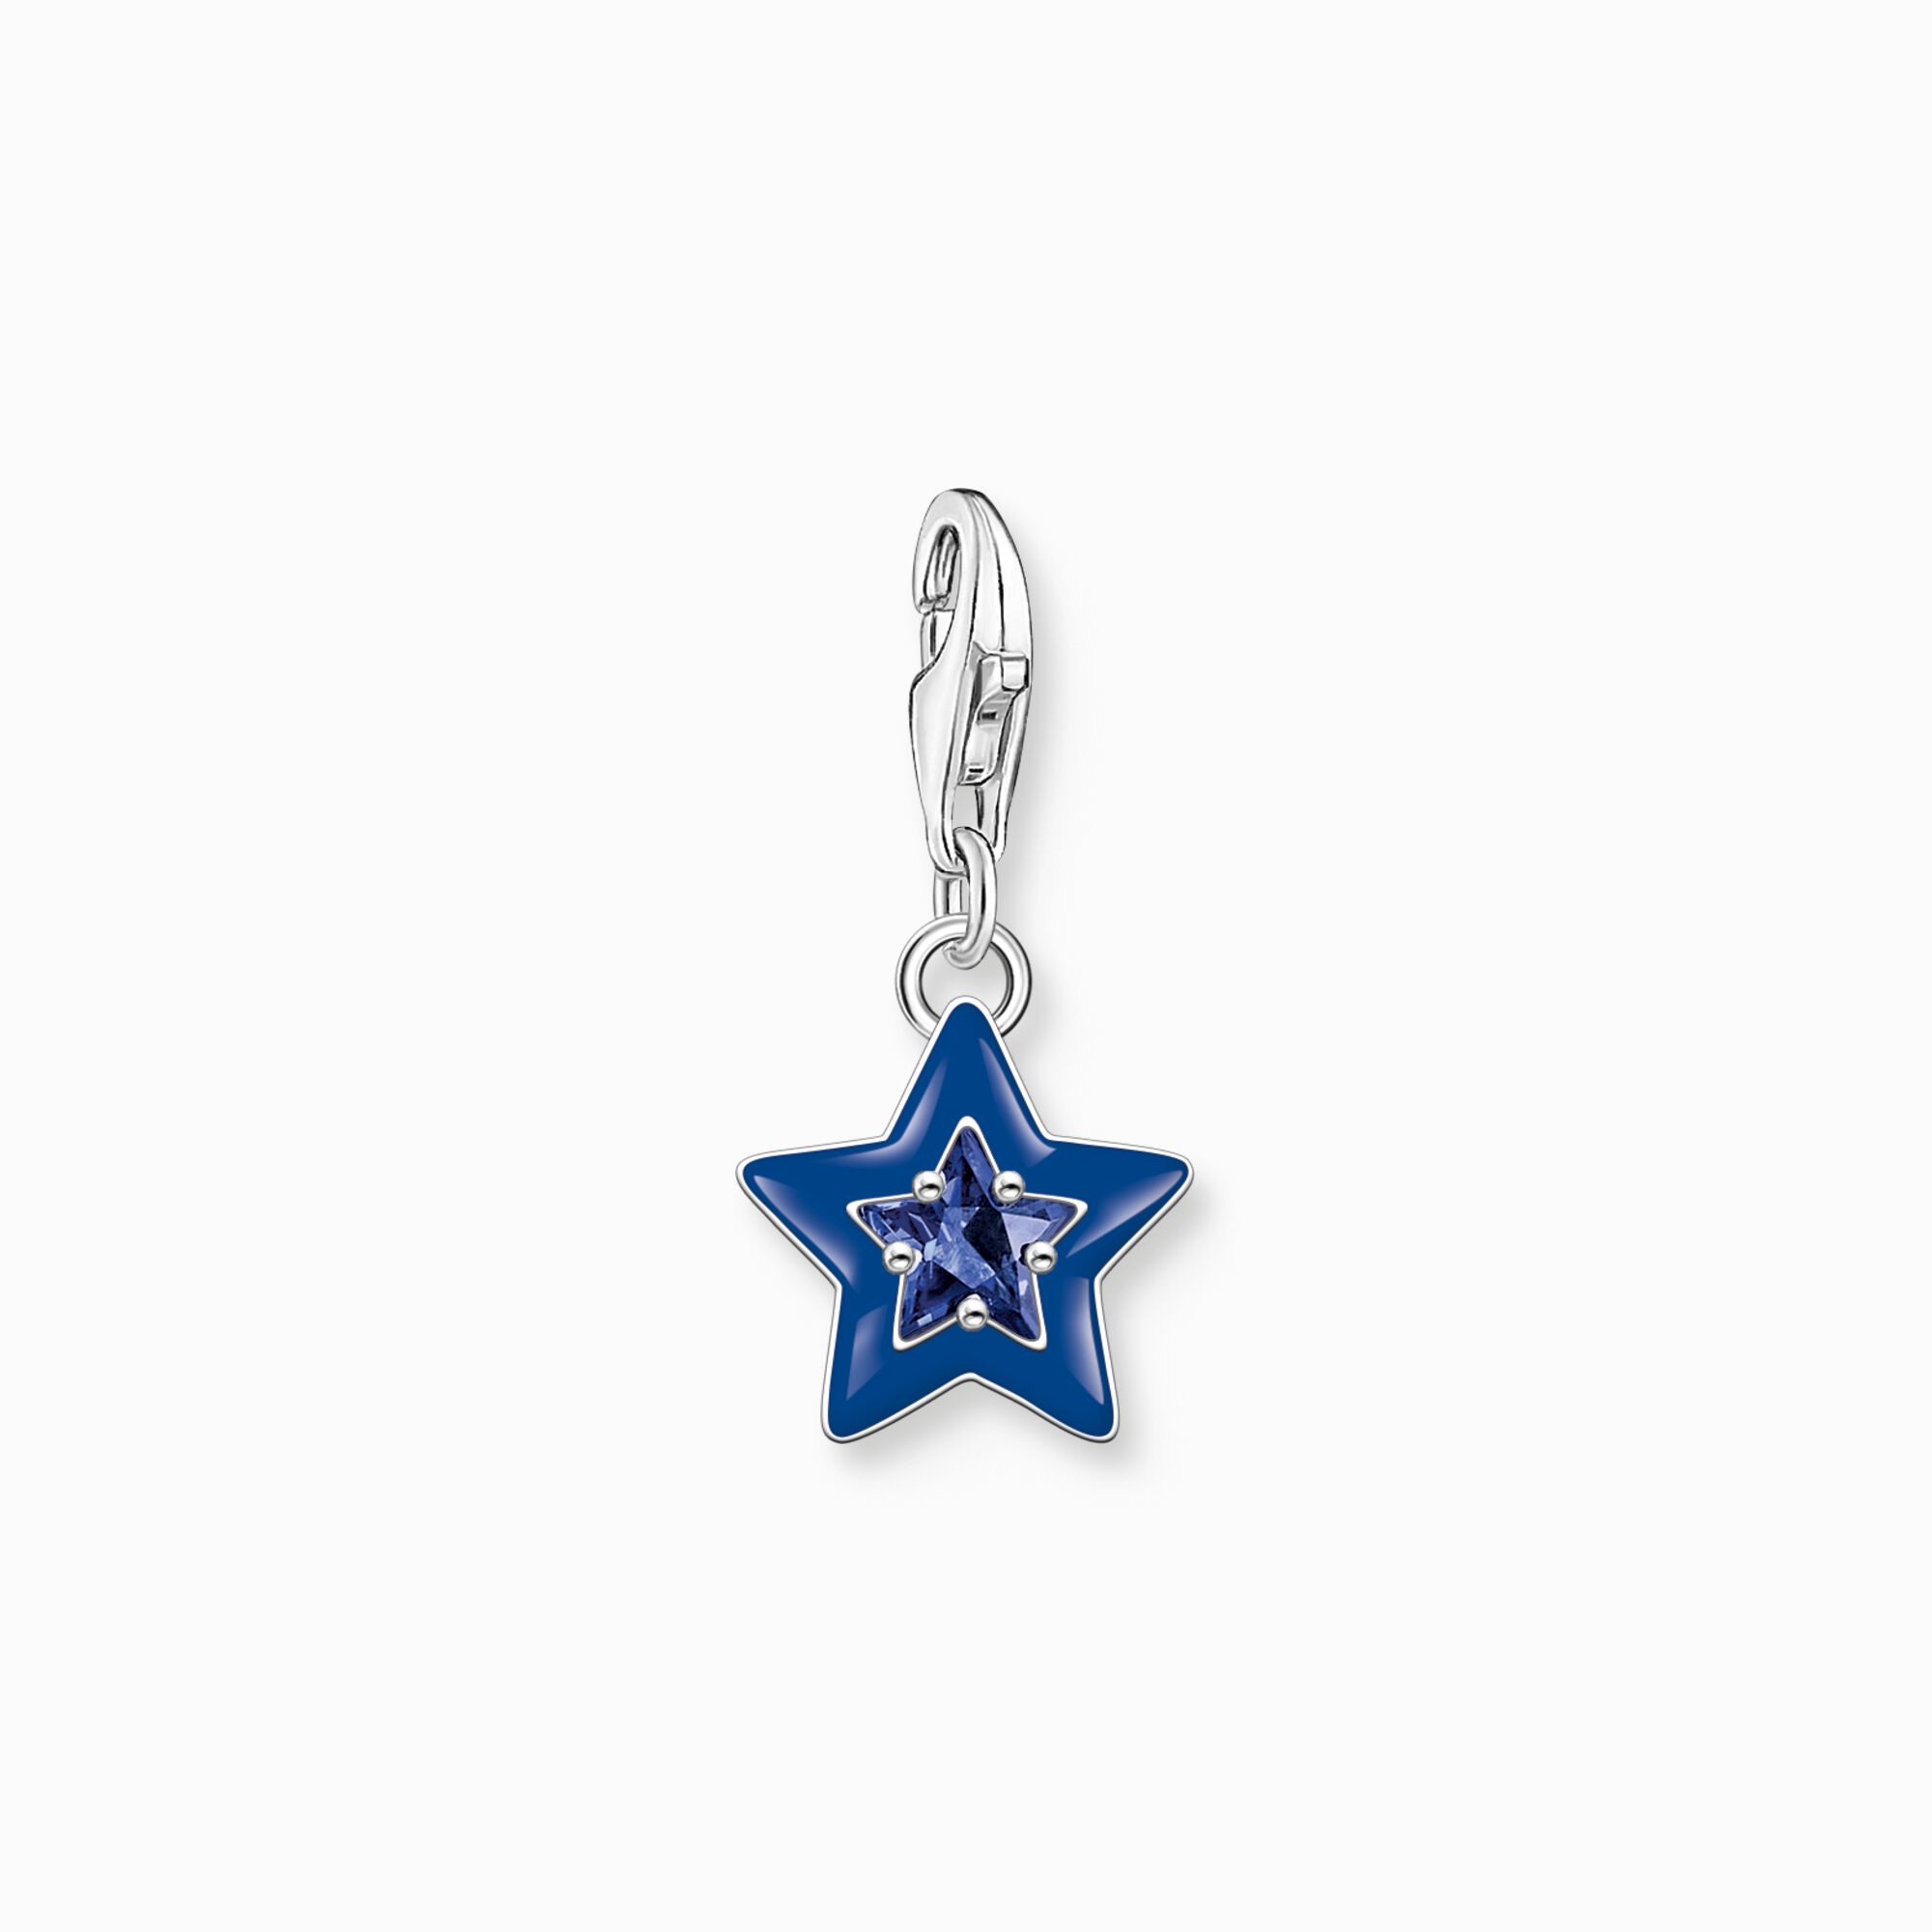 Charm pendant star with sapphire blue stone and blue cold enamel silver from the Charm Club collection in the THOMAS SABO online store